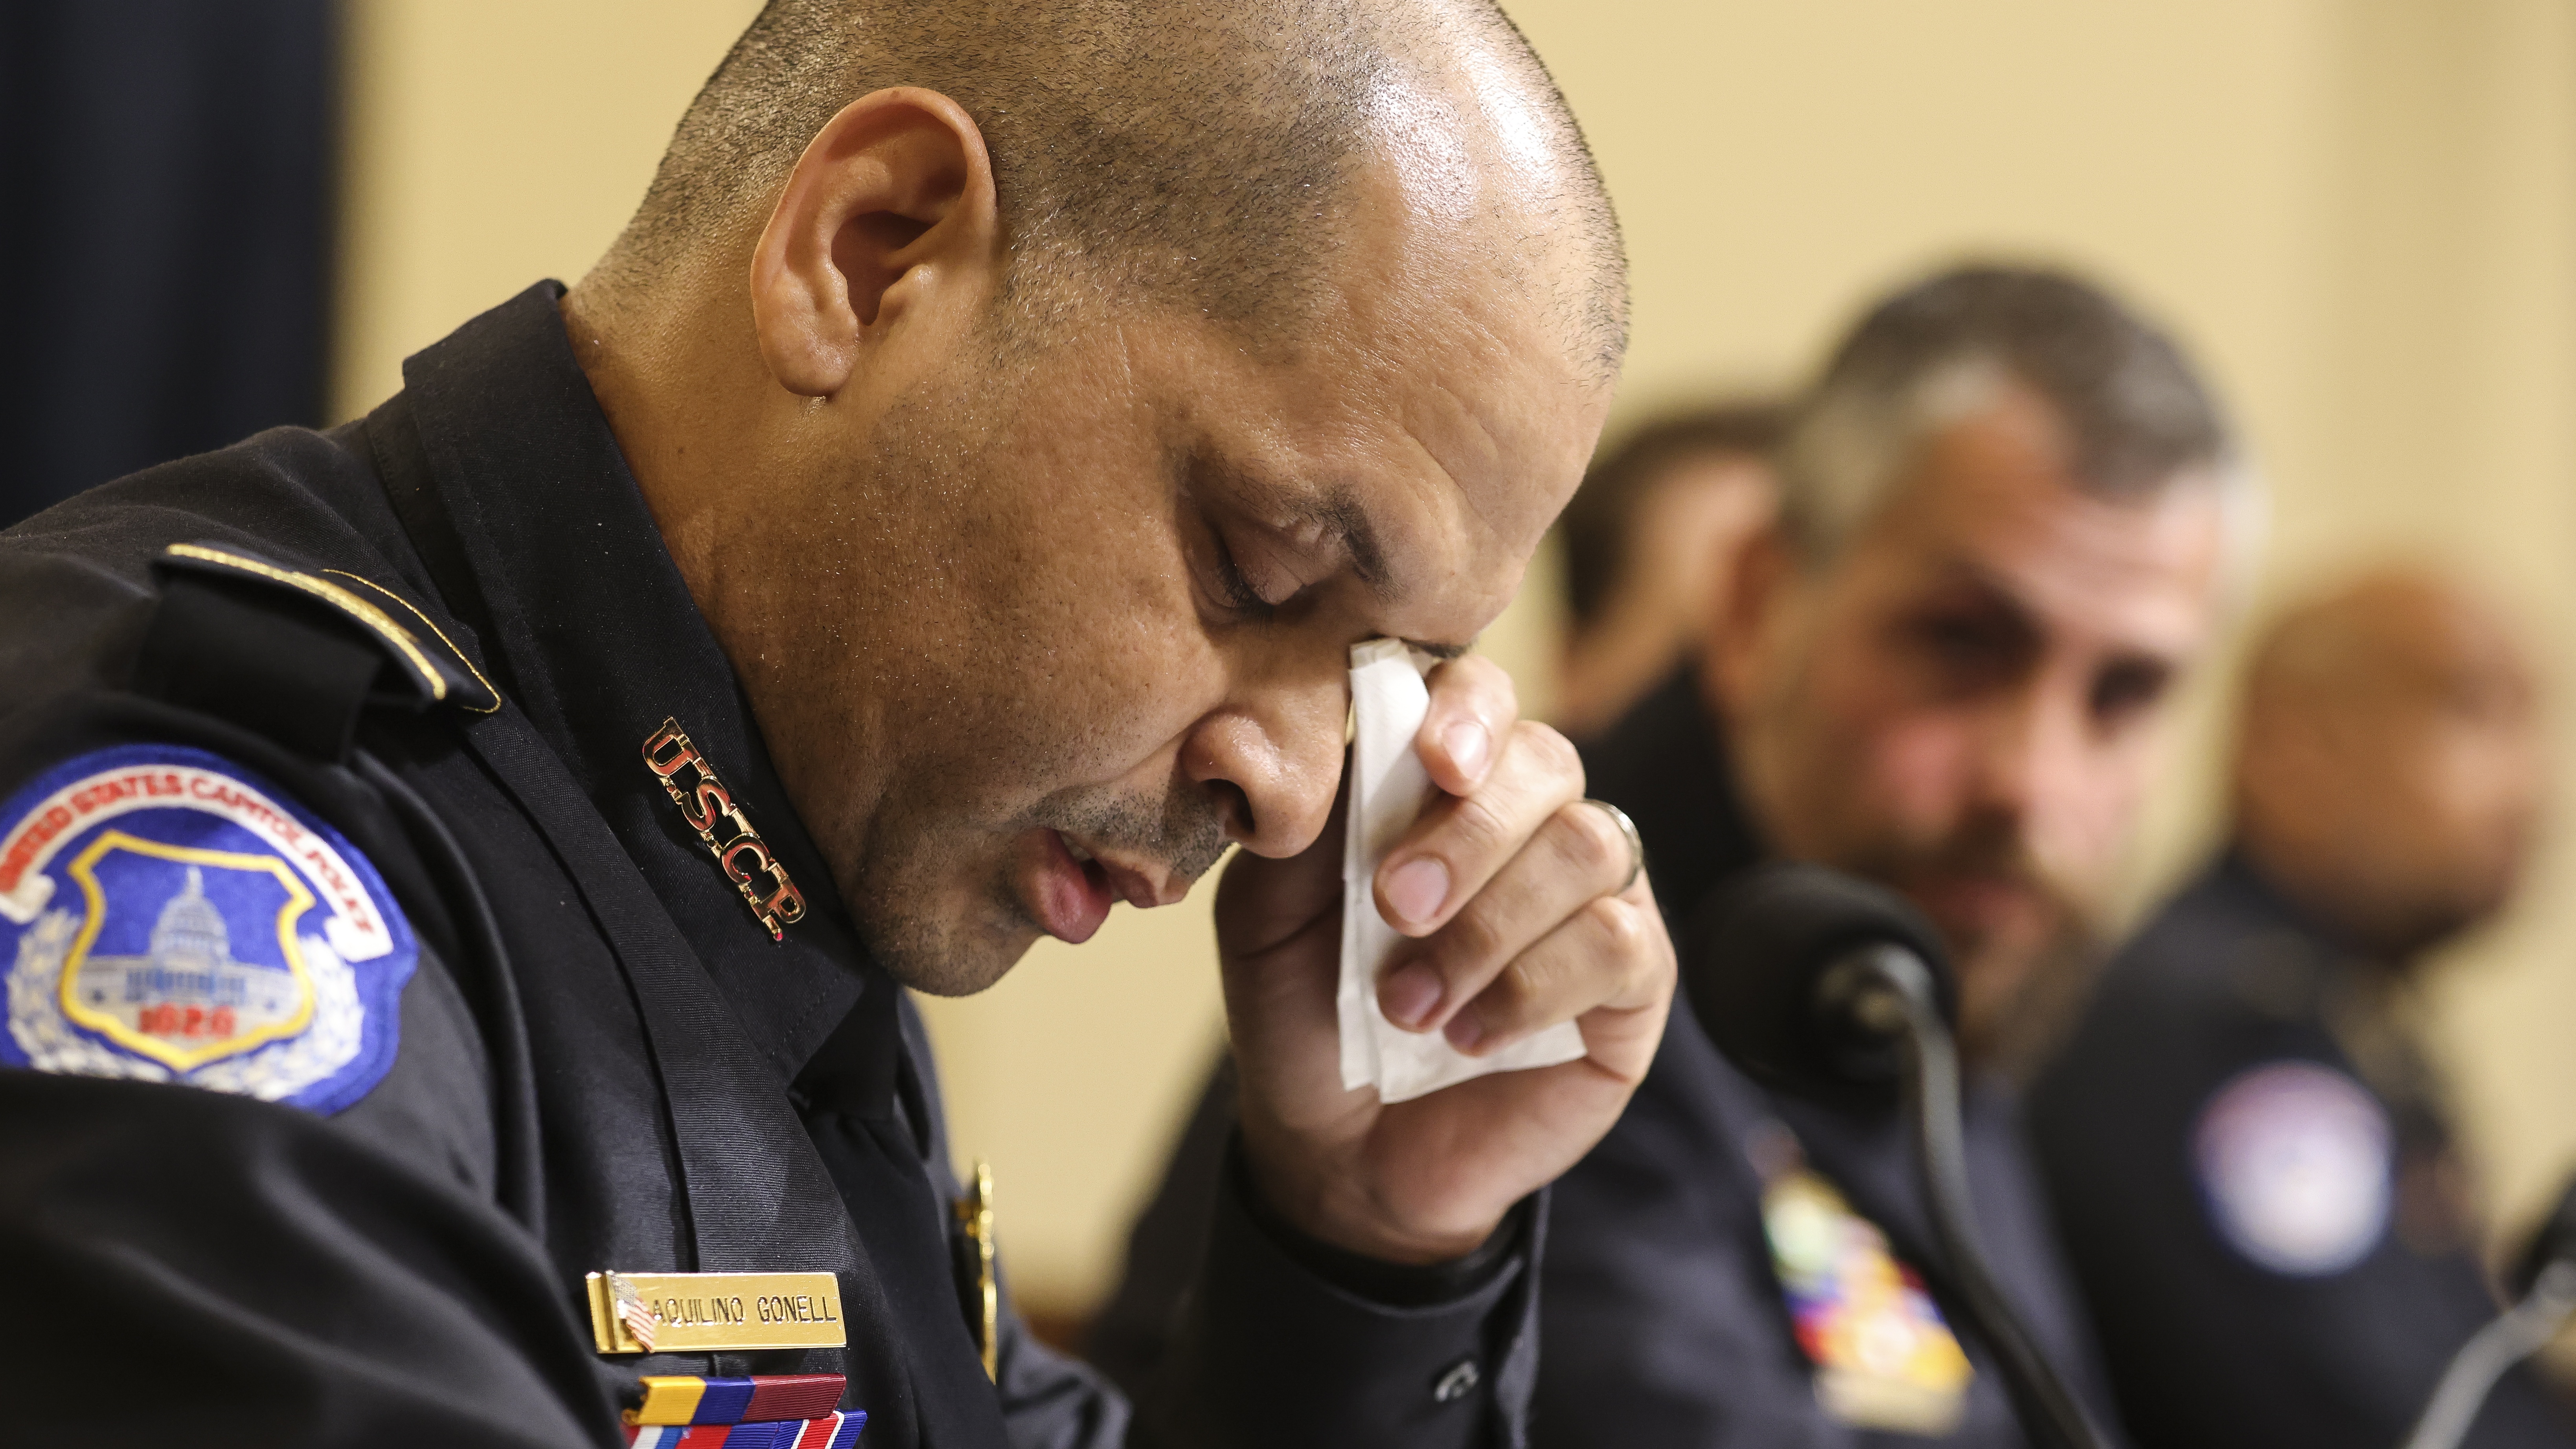 Capitol Police Sergeant Aquilino Gonell wipes away tear while giving evidence